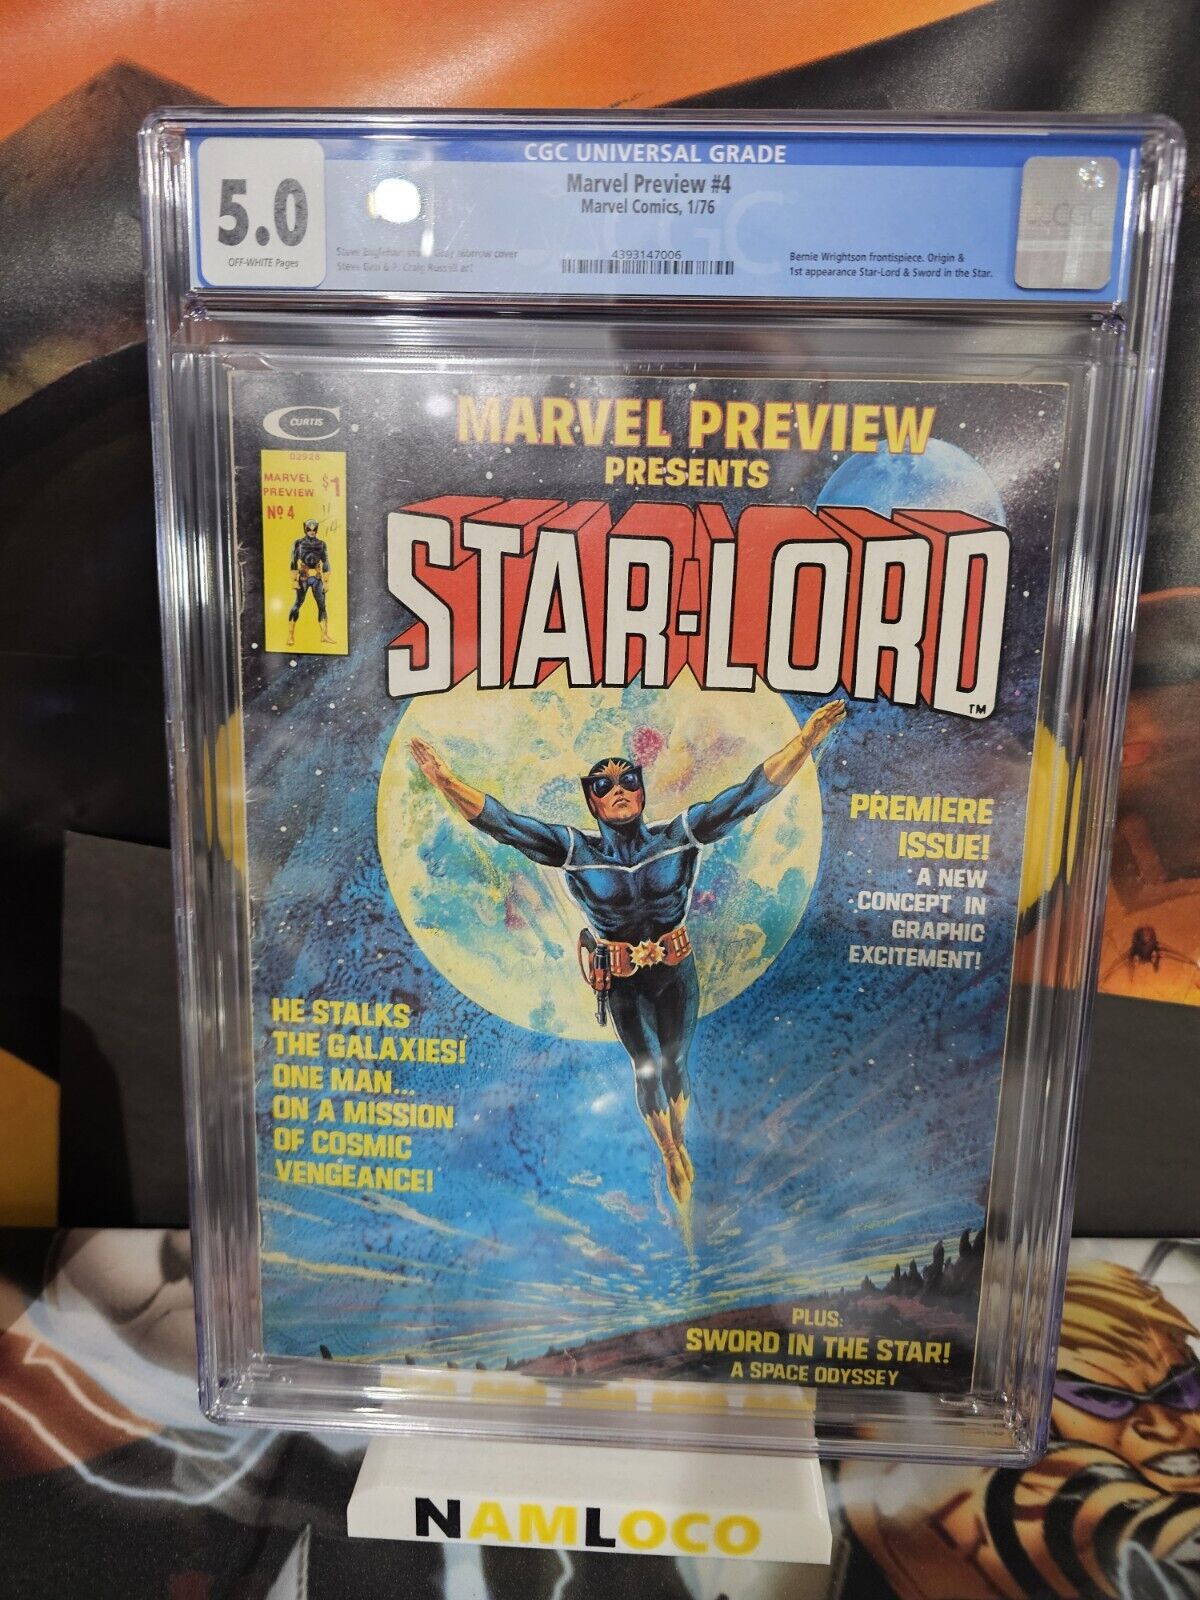 MARVEL PREVIEW #4 - CGC 5.0 - 1ST APP OF STAR-LORD KEY Marvel 1976 